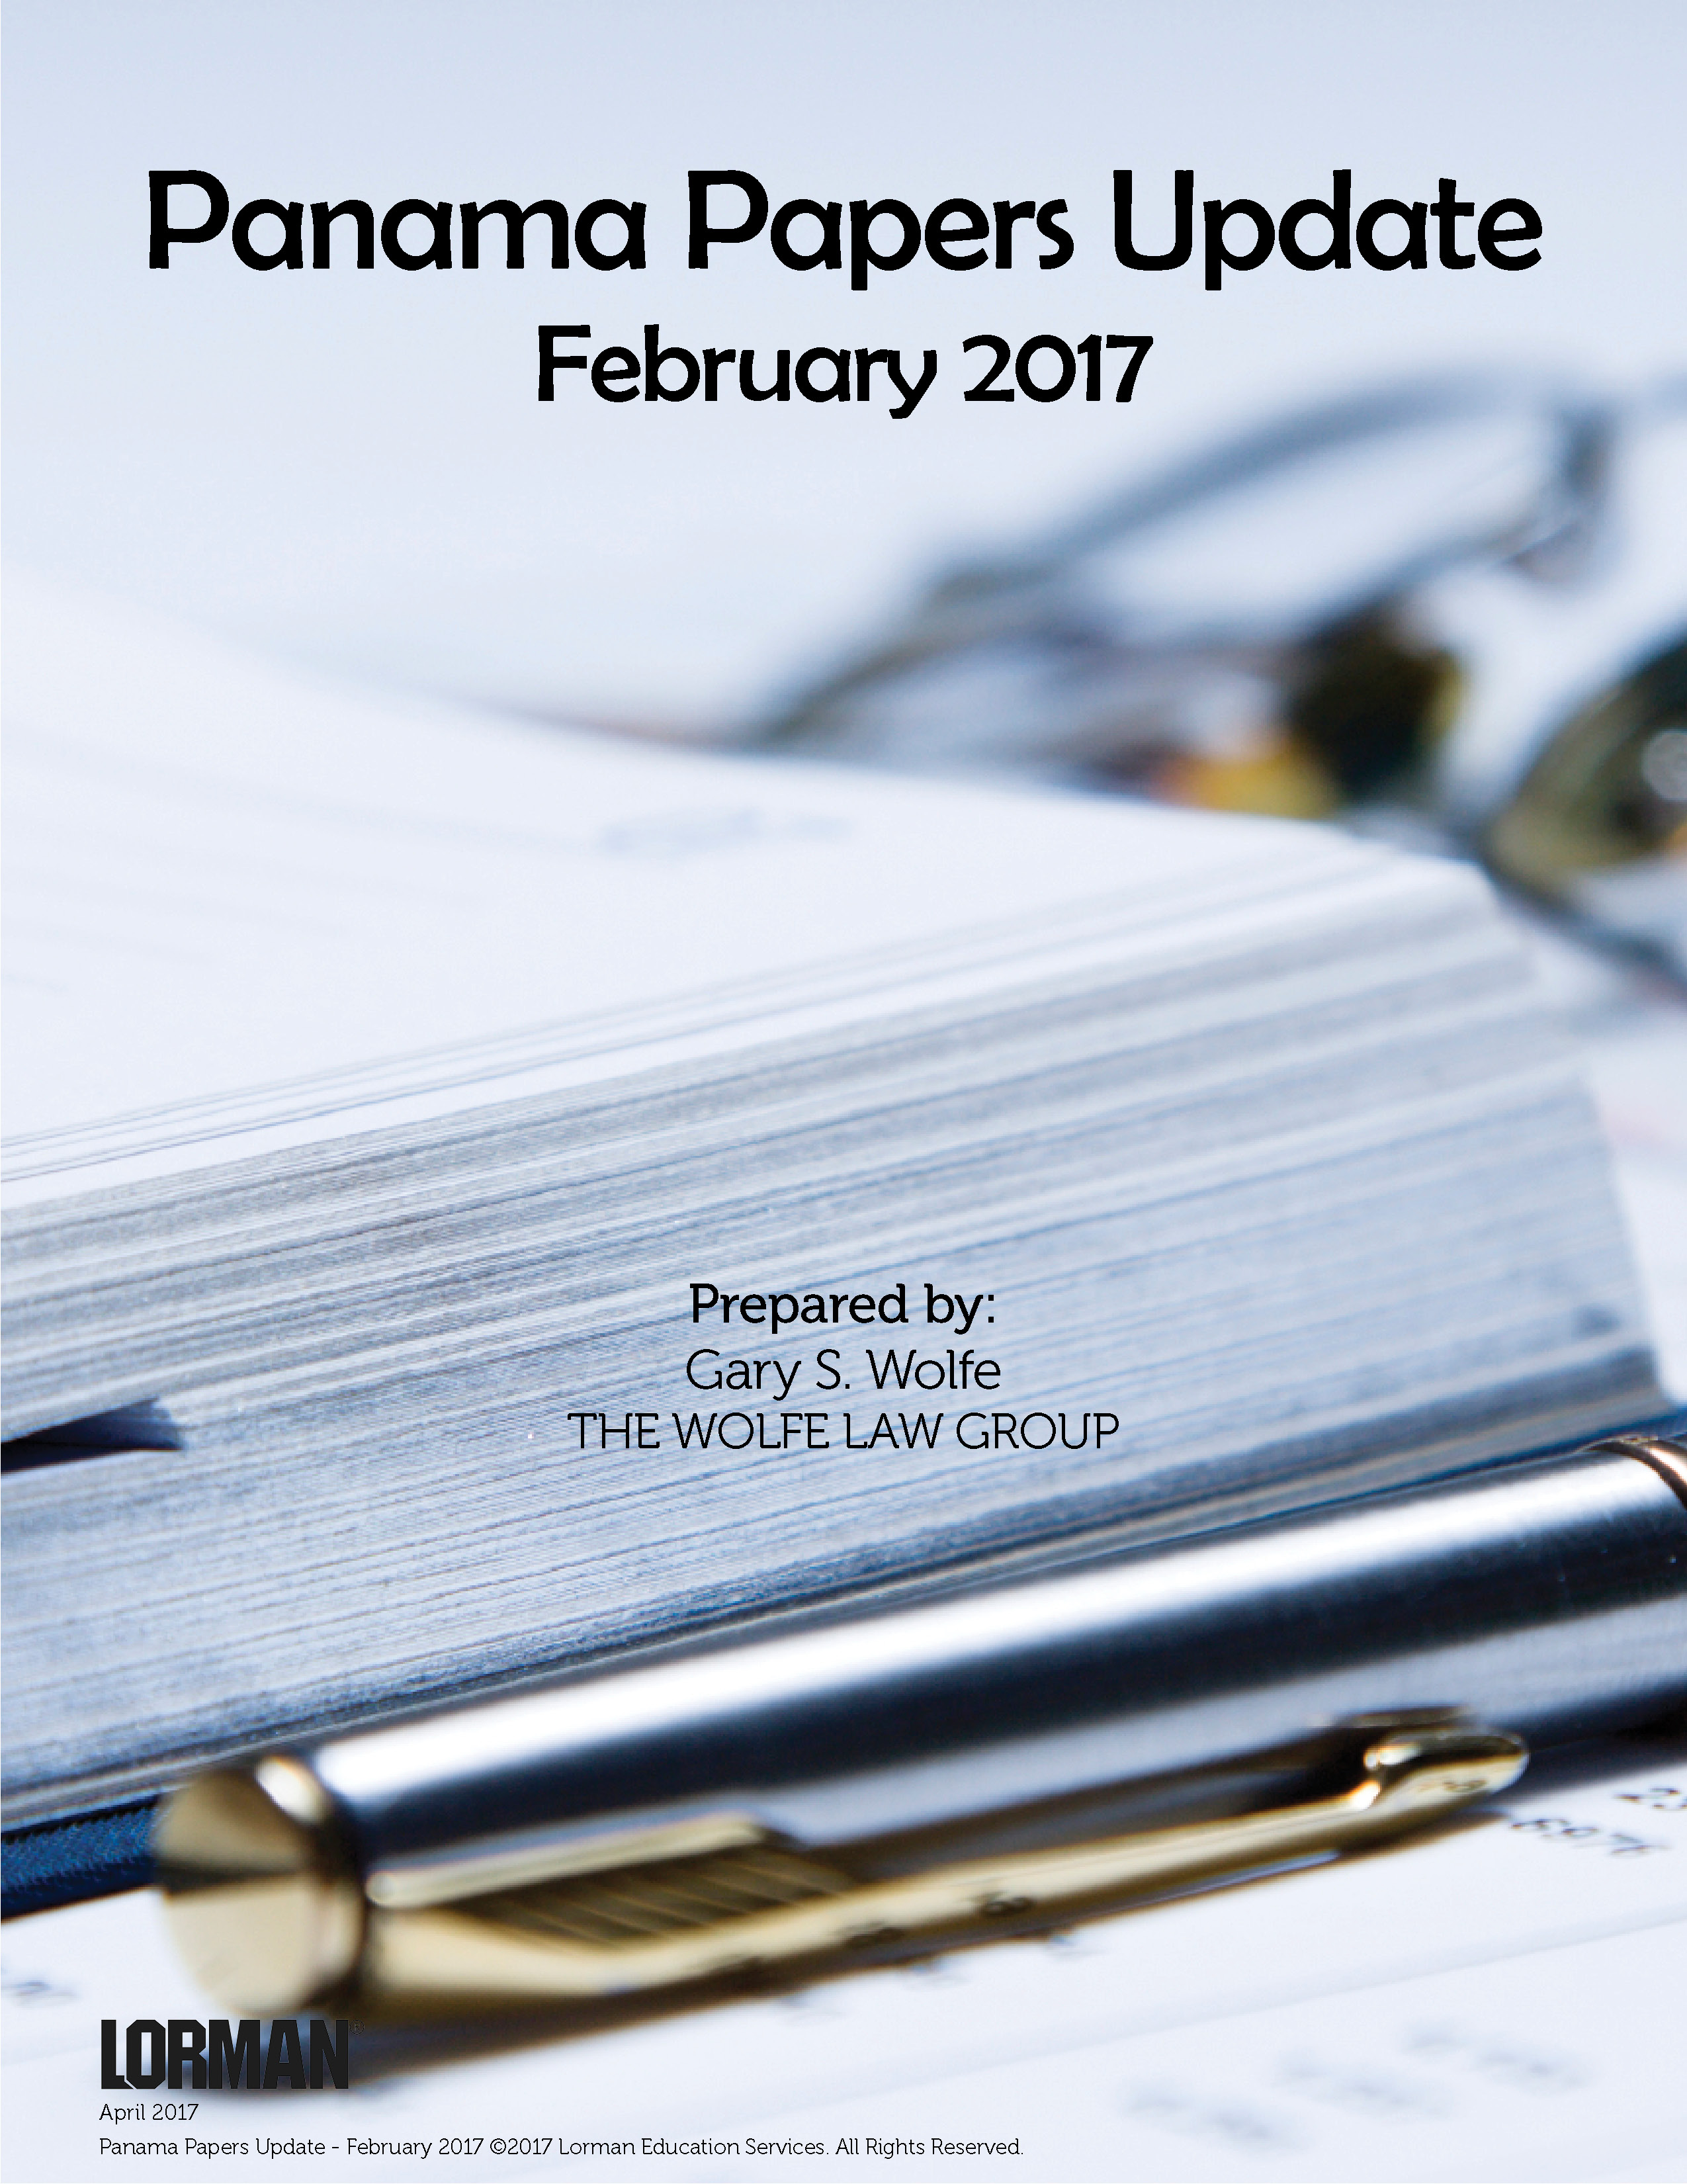 Panama Papers Update - February 2017